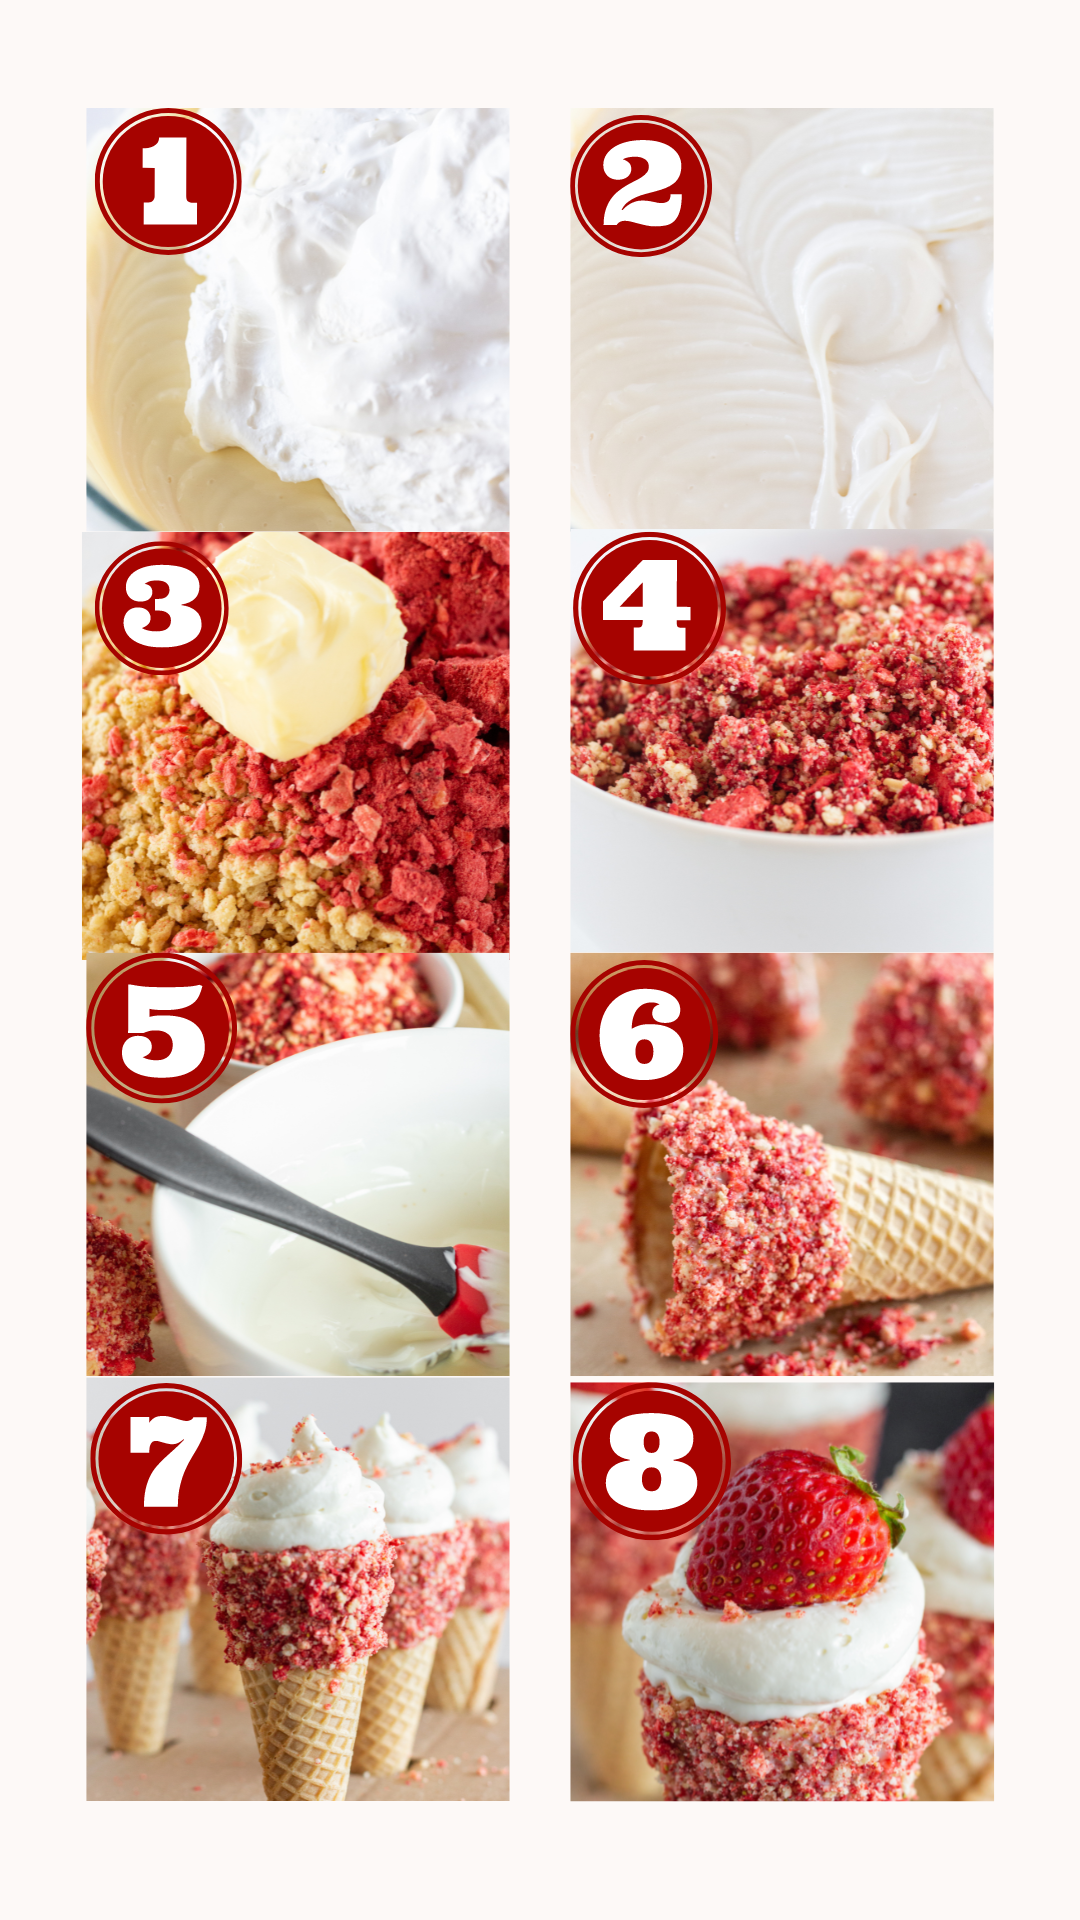 Steps for making Strawberry Crunch No Bake Cheesecake Cones, by Top US dessert blog Practically Homemade